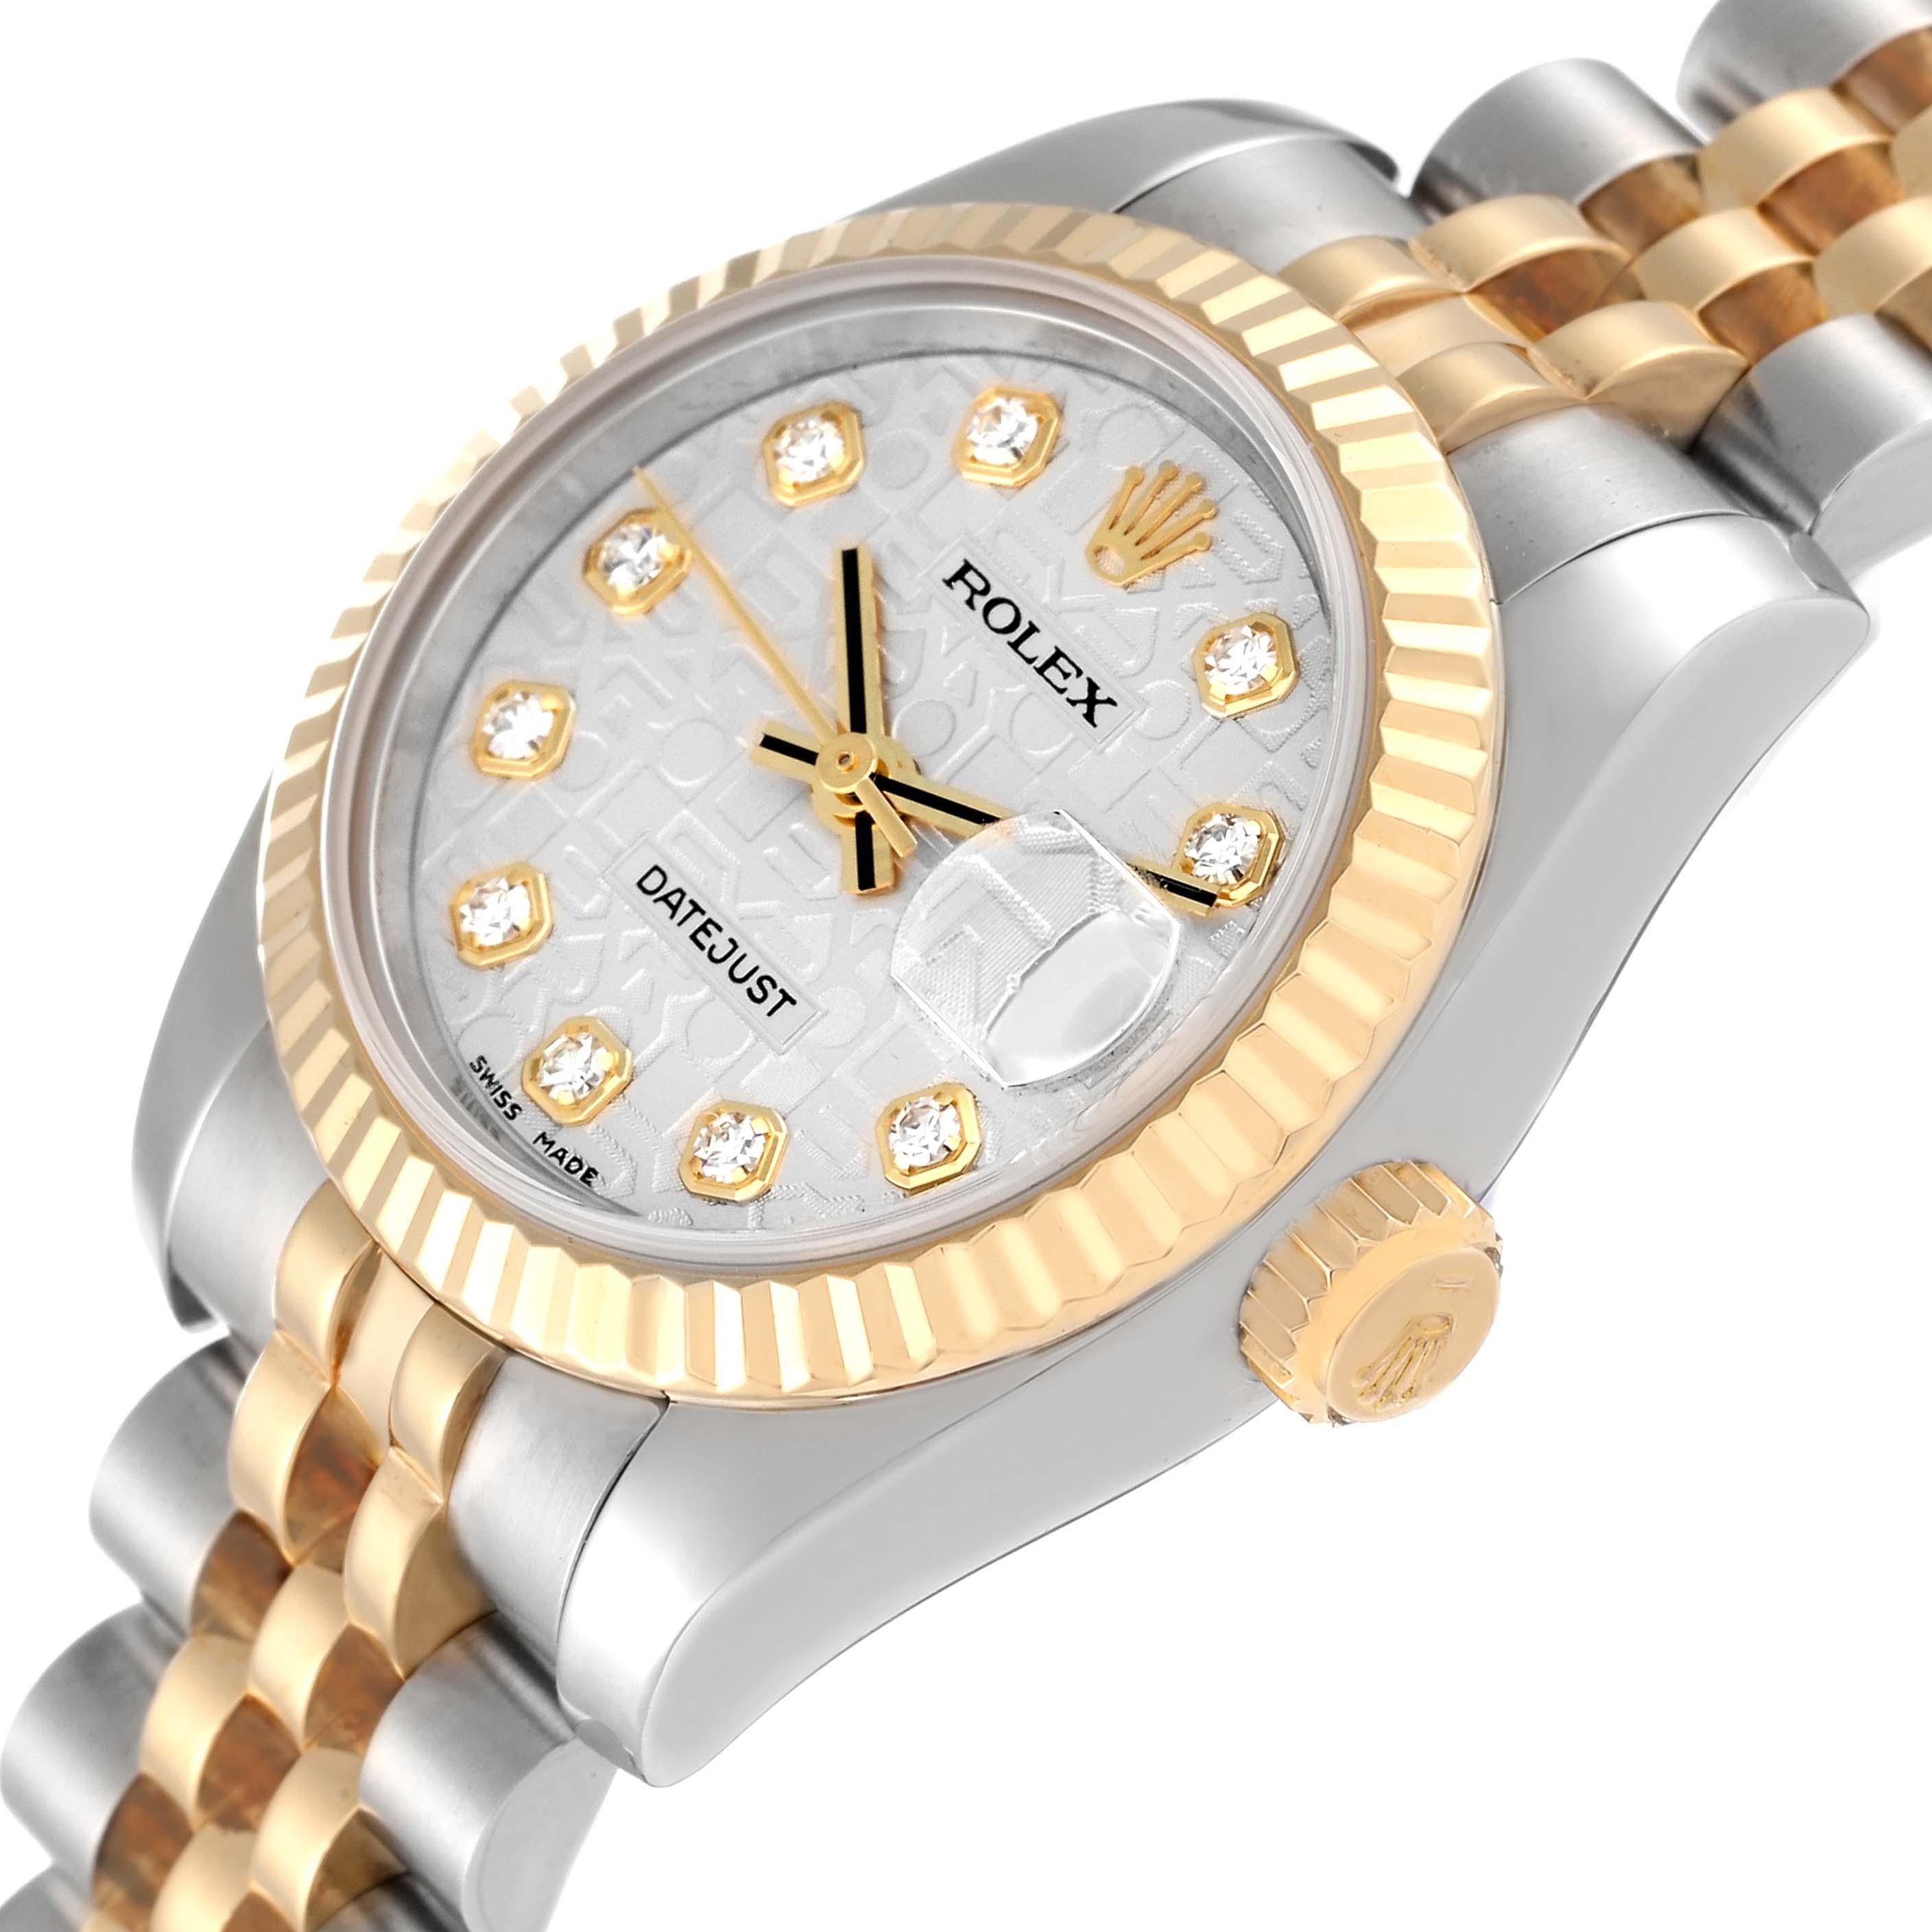 Rolex Datejust Steel Yellow Gold Anniversary Diamond Dial Ladies Watch 179173 For Sale 1